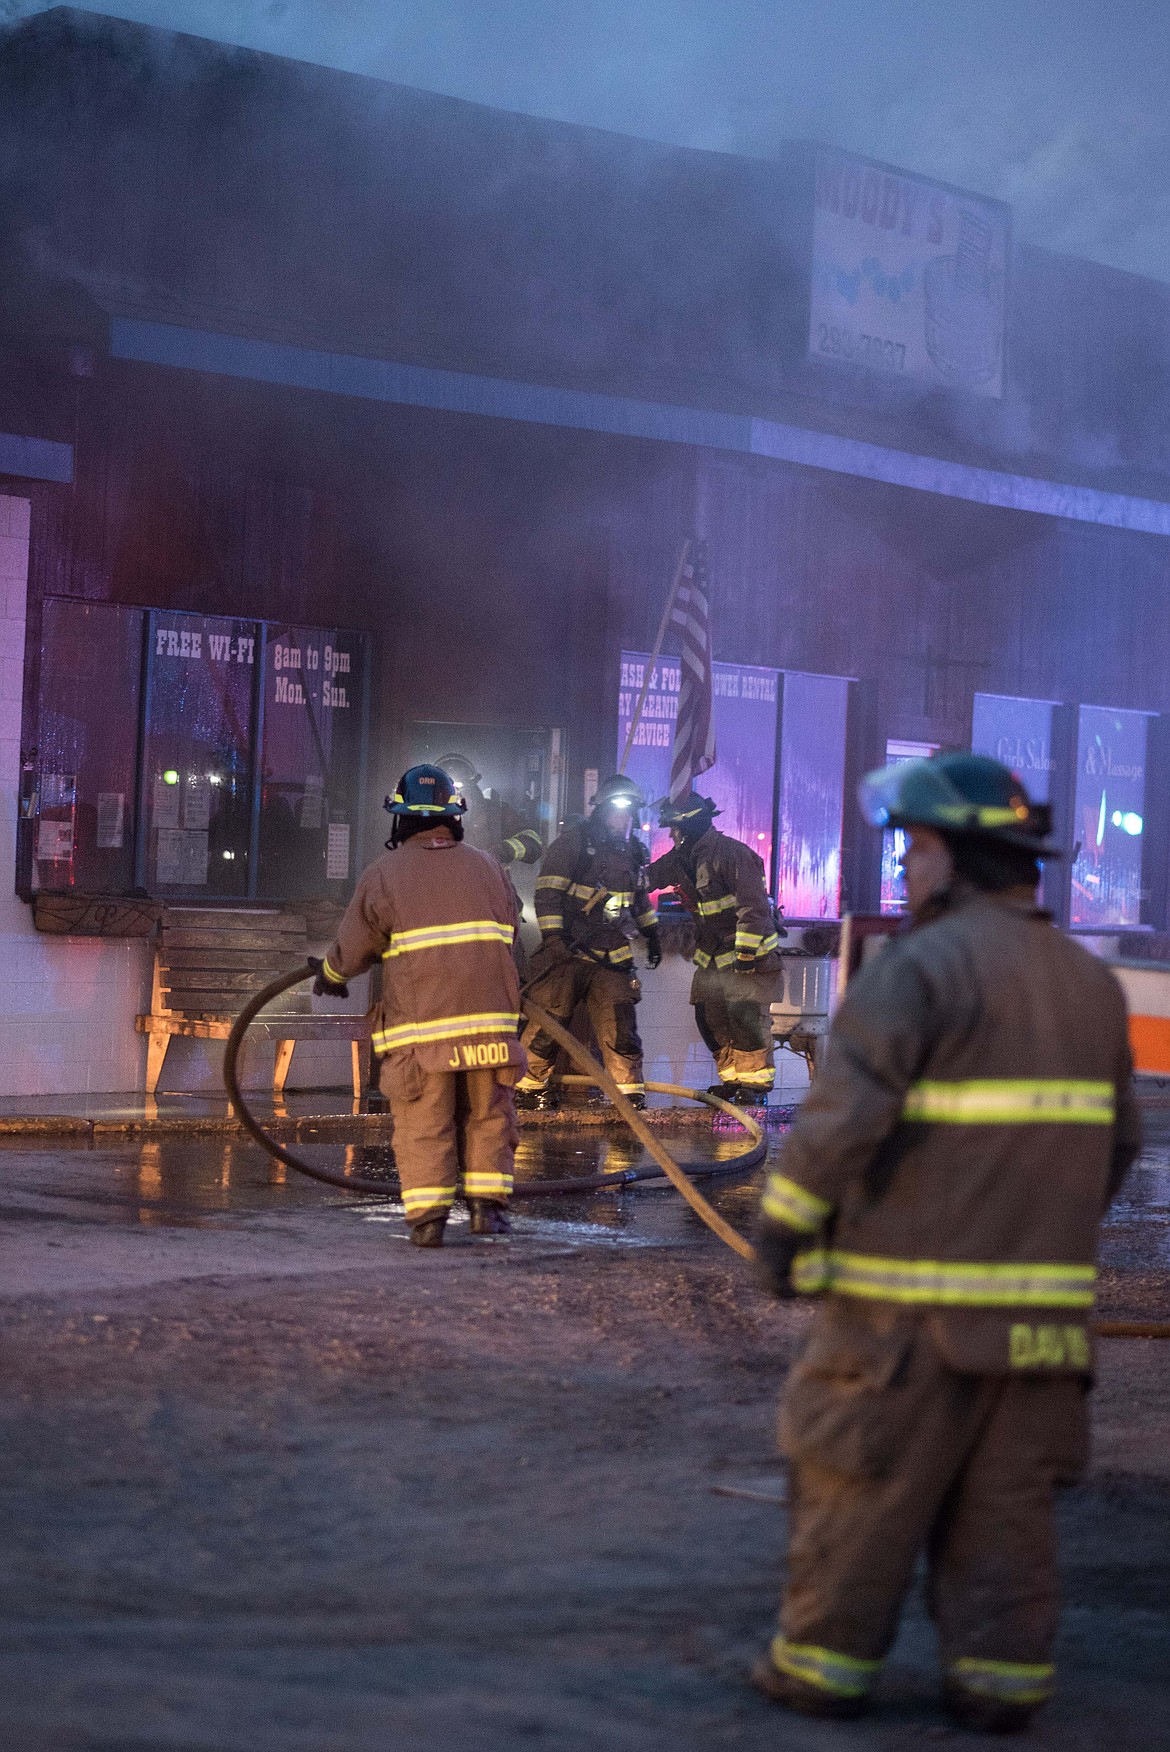 Firefighters exit the inside of Moody&#146;s Dirty Laundry &amp; Self-Service Dog Wash, Friday night in Libby. Assistant Chief/Fire Marshall Steve Lauer said parts of the fire were &#147;a little tougher getting to&quot; than anticipated. (Luke Hollister/The Western News)